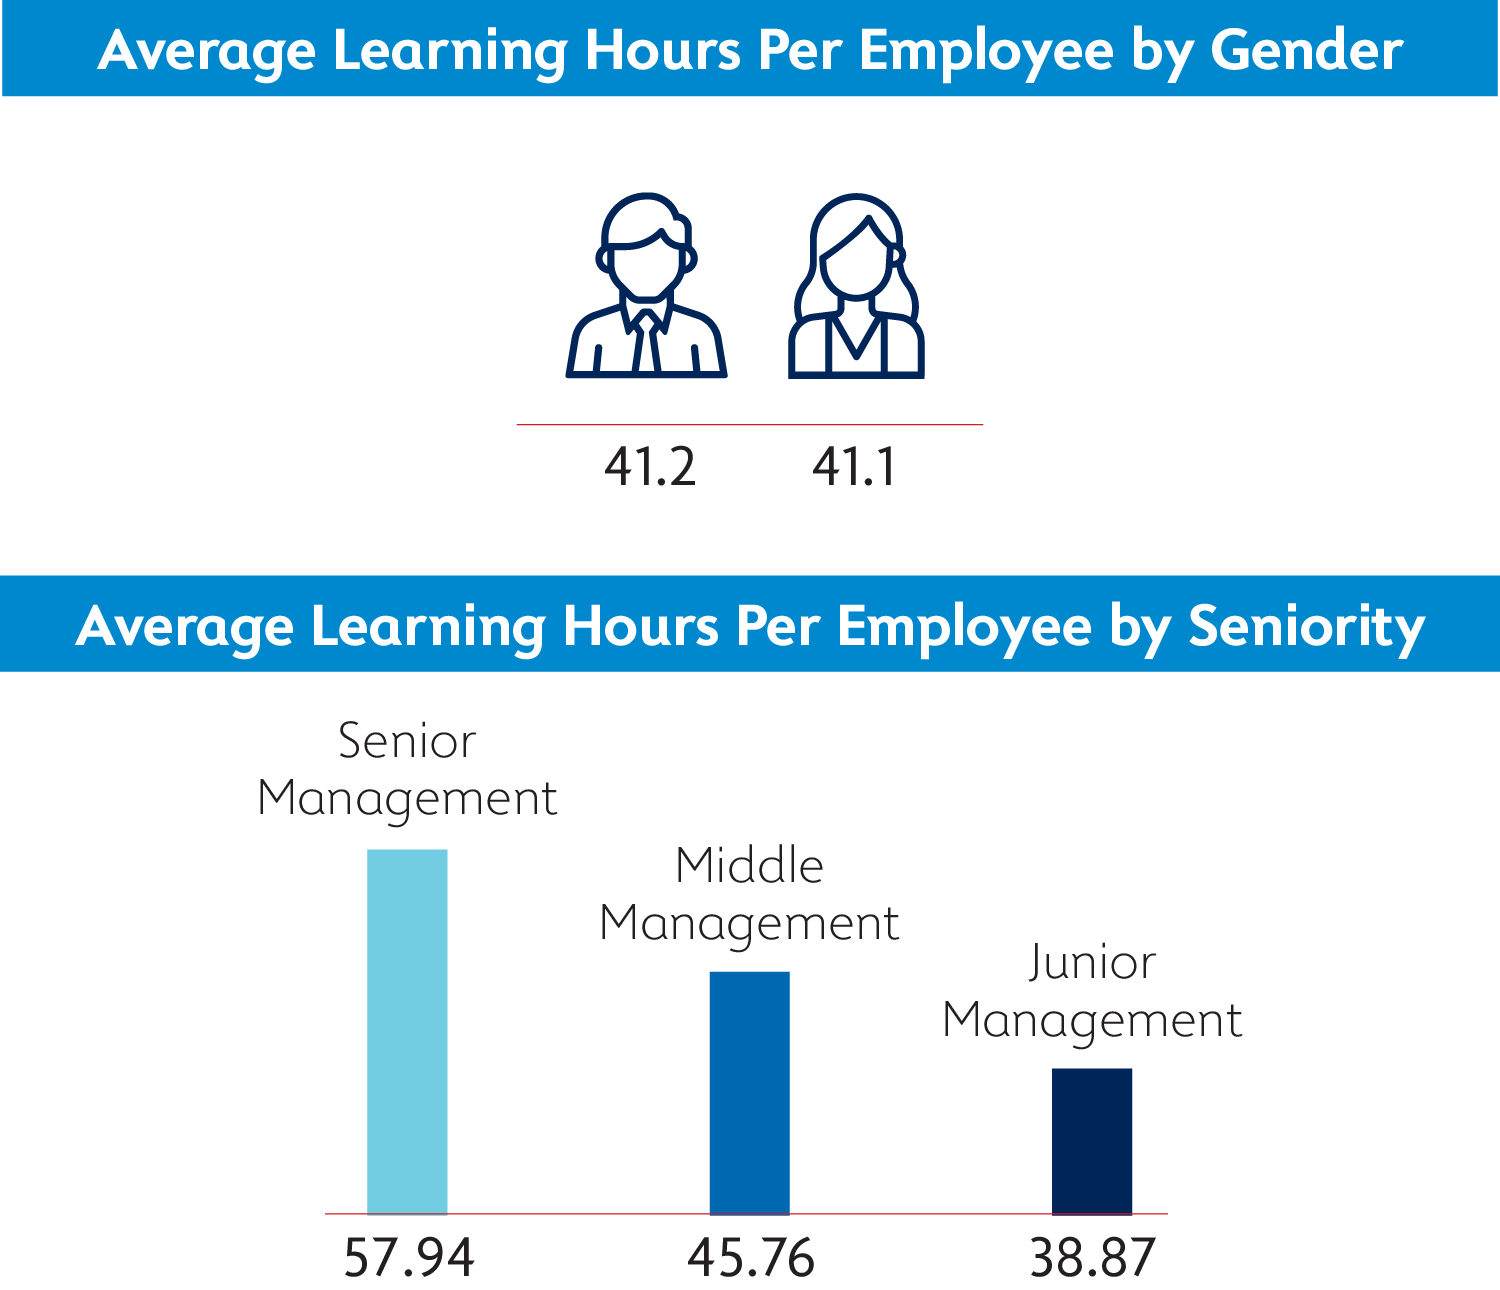 Average Learning Hours Per Employee